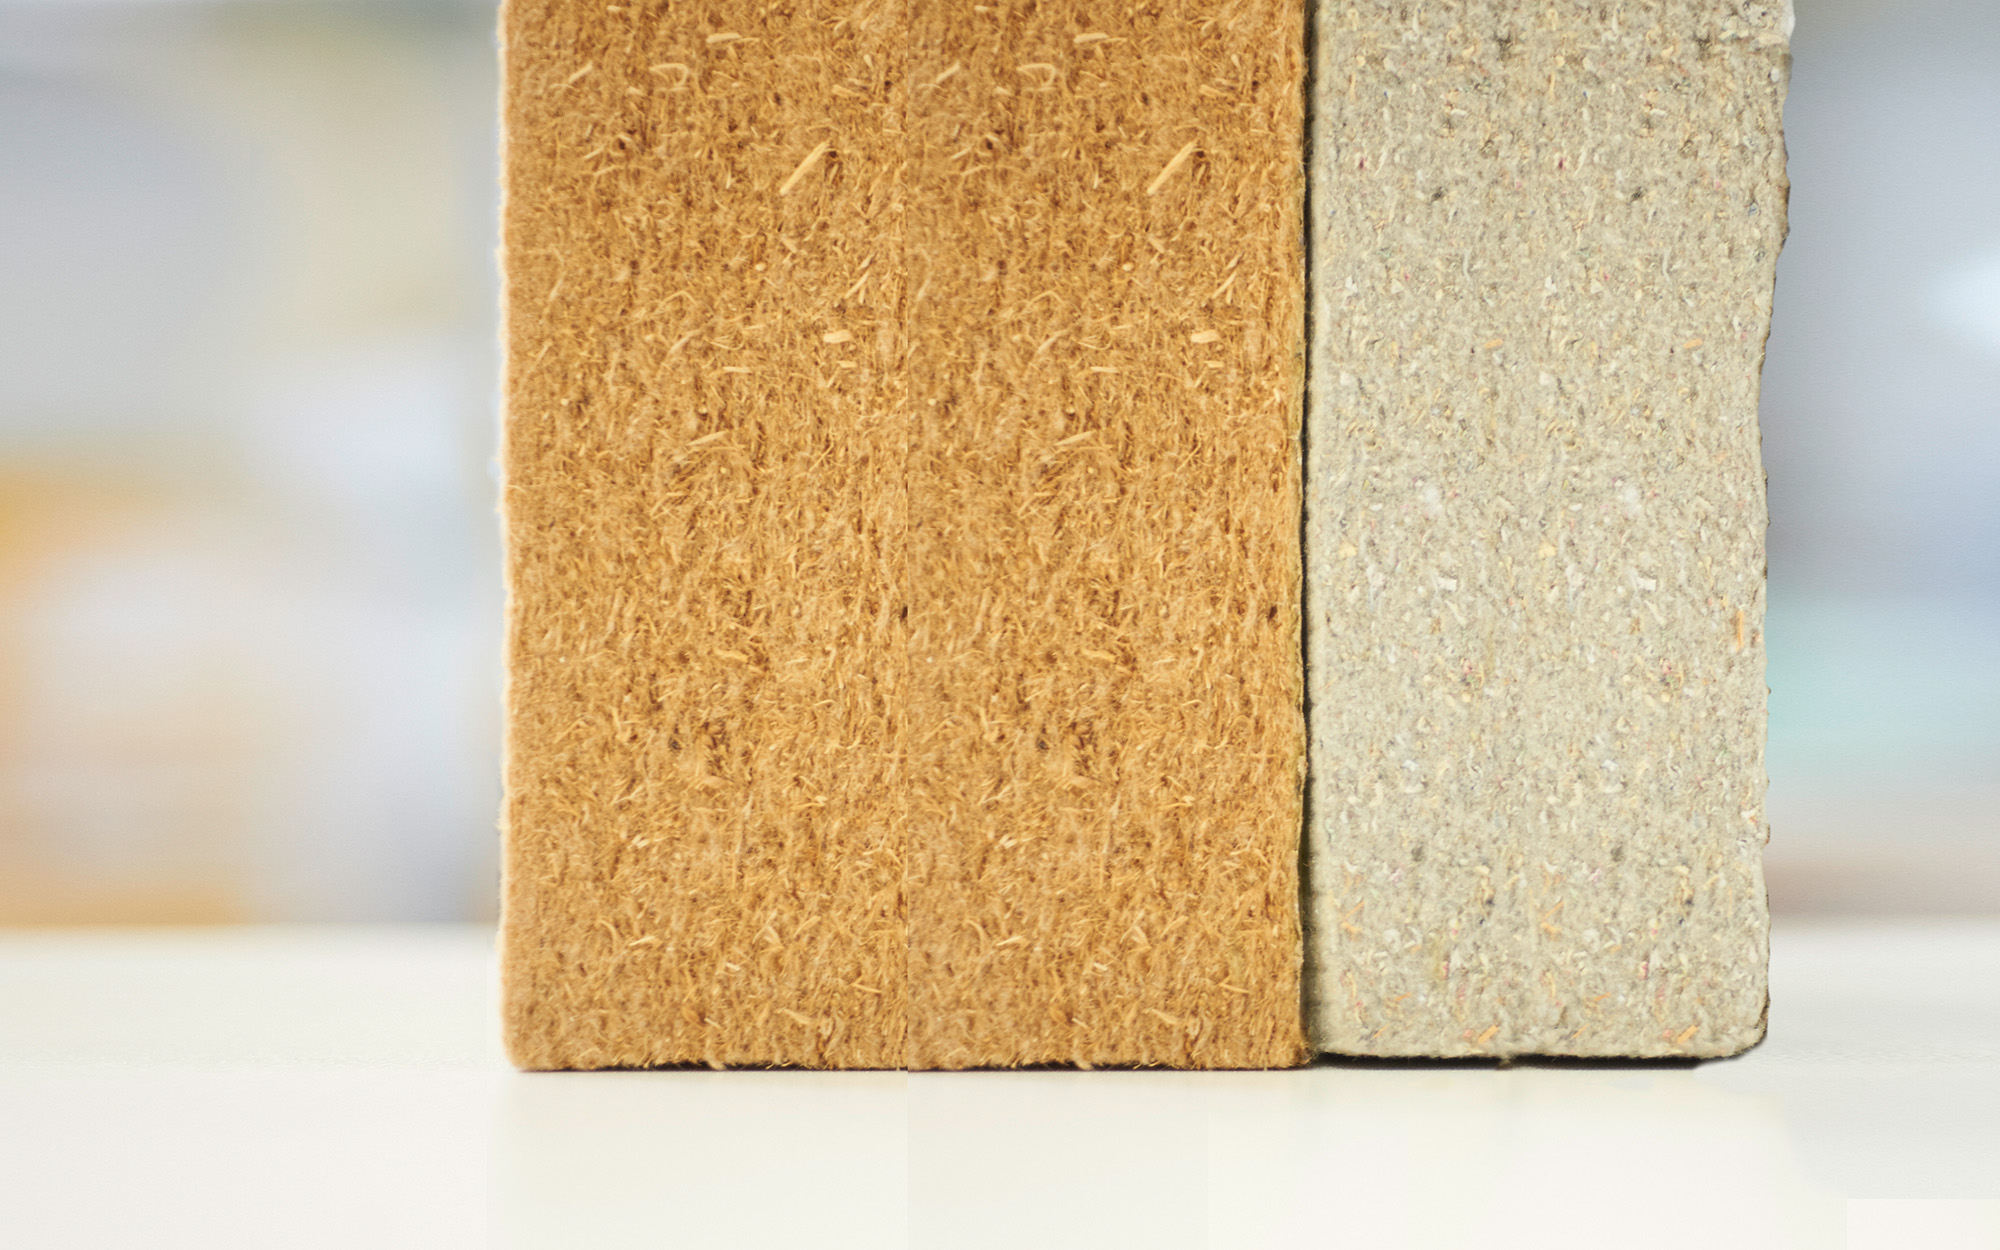 Grenzebach contributes expertise in wood fiber insulation materials